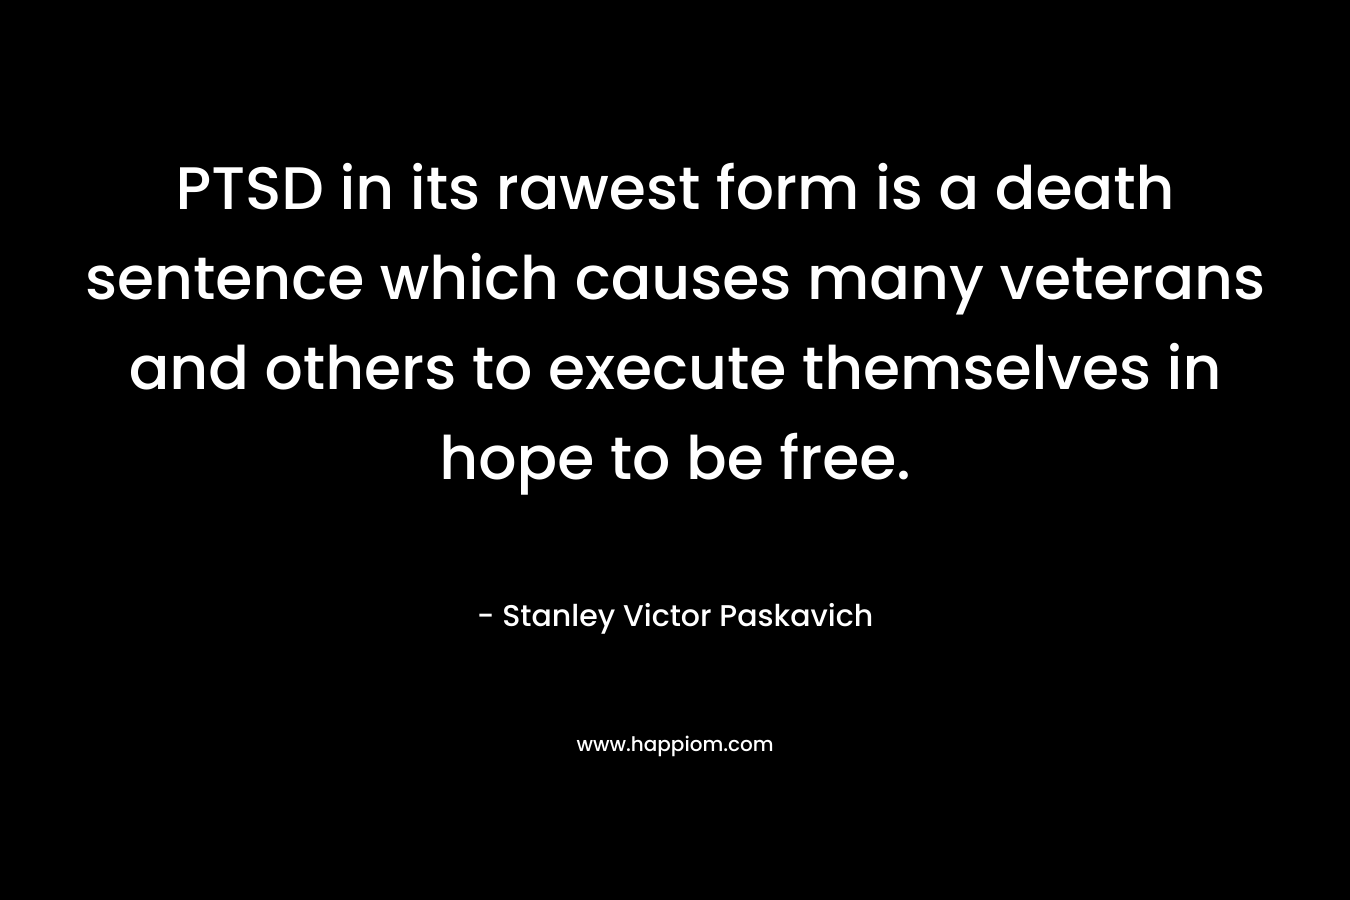 PTSD in its rawest form is a death sentence which causes many veterans and others to execute themselves in hope to be free. – Stanley Victor Paskavich